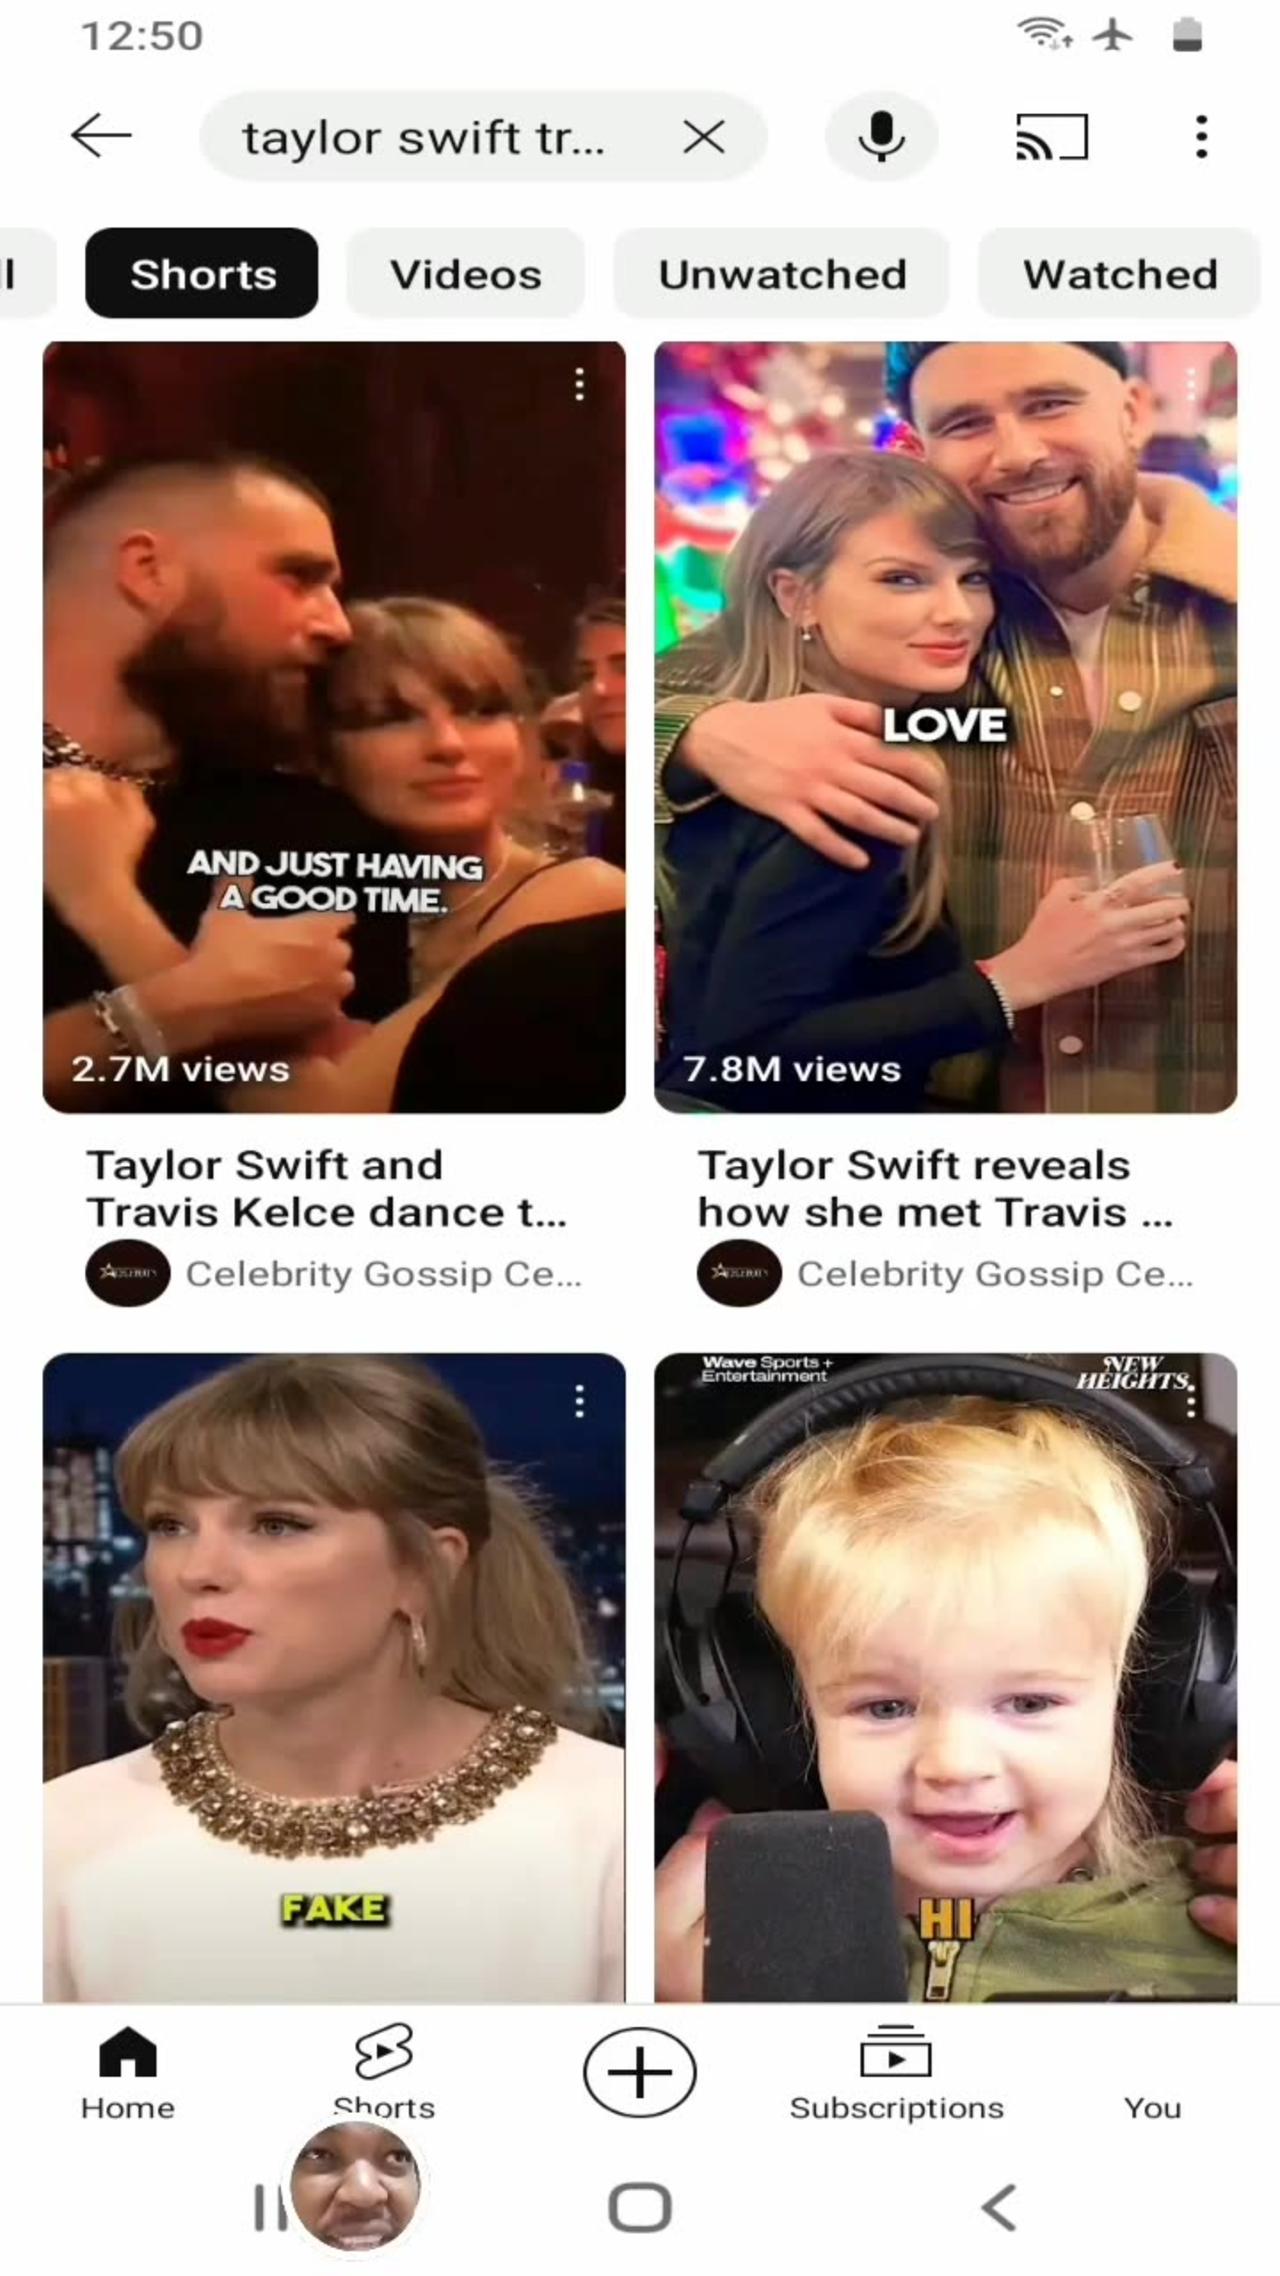 Why do you love Taylor Swift?